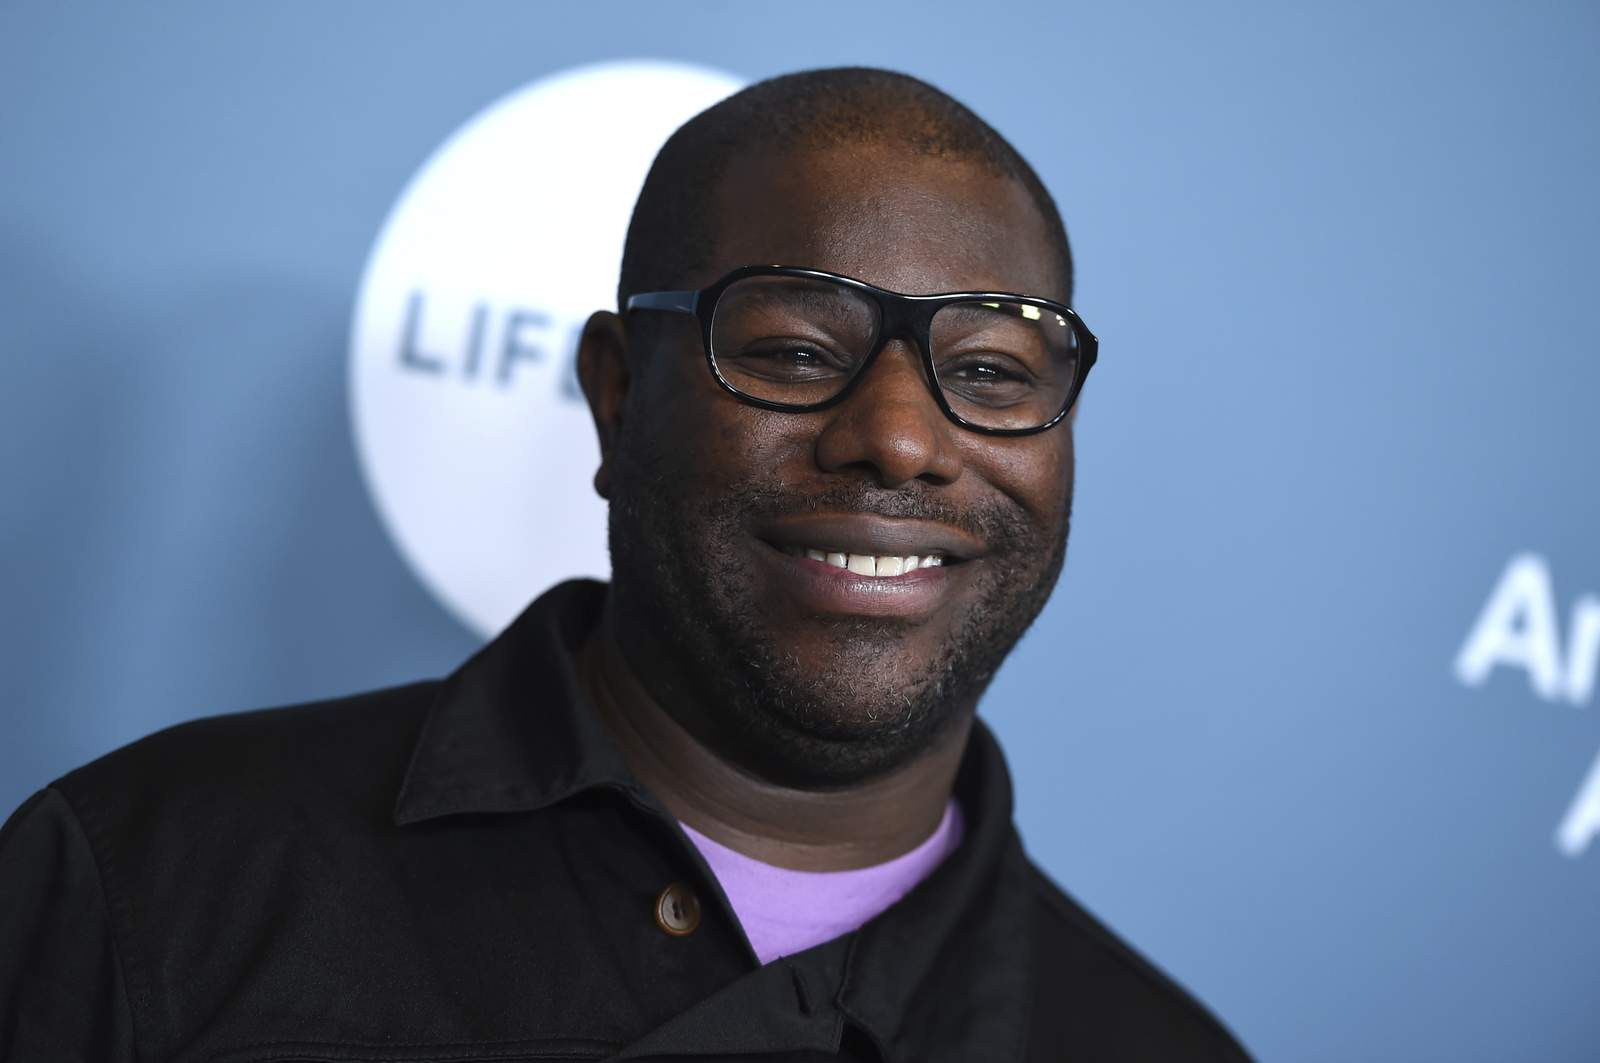 Steve McQueen unveils an anthology of racism and resistance